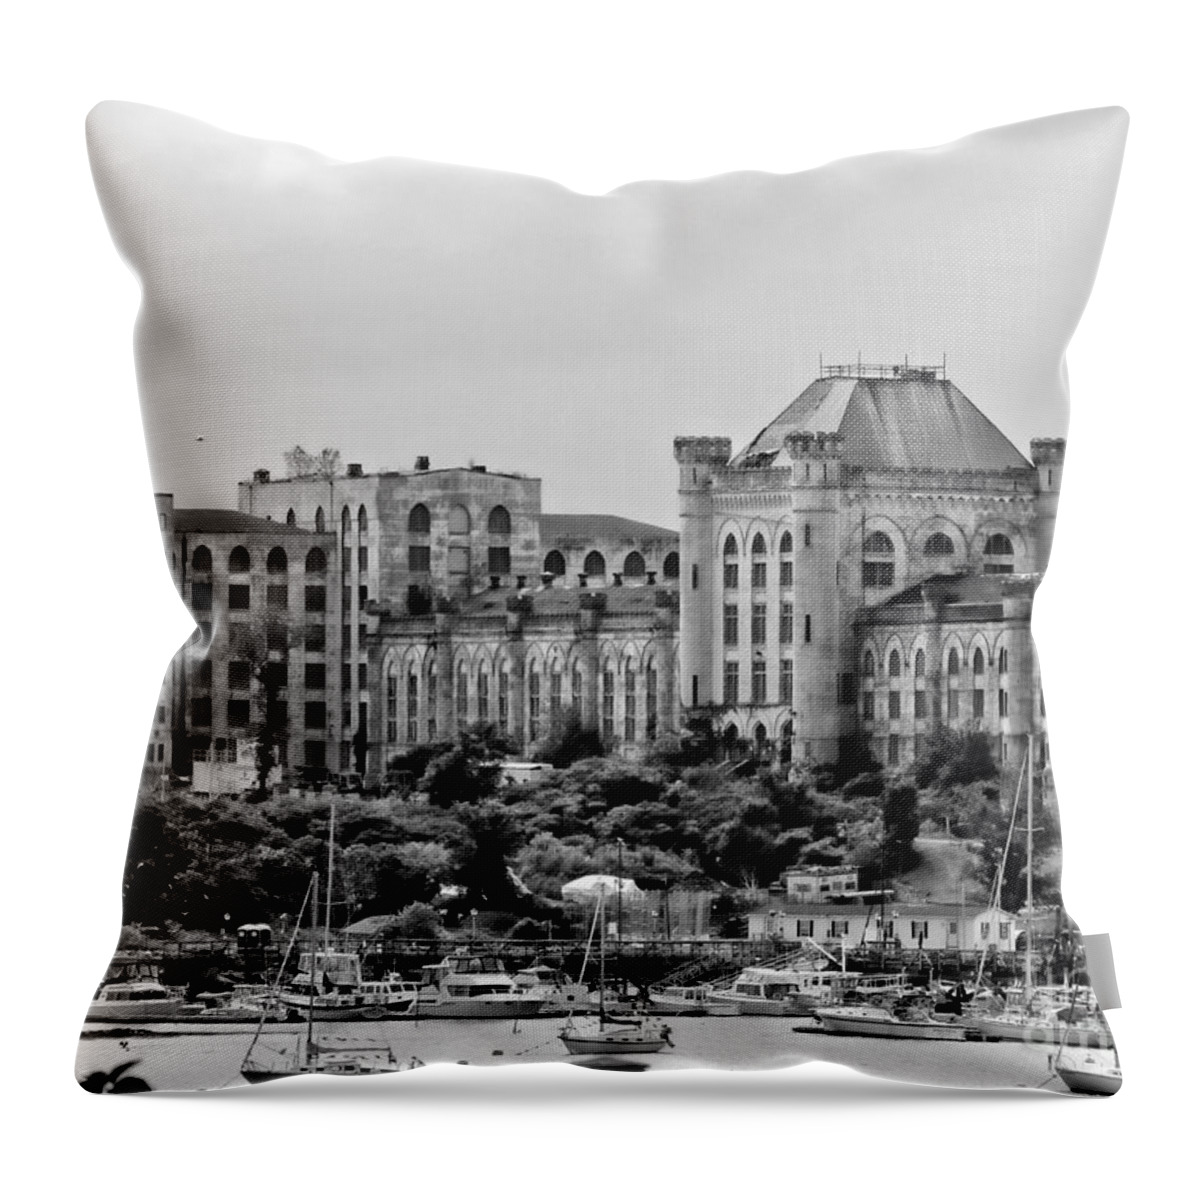 Landmark Throw Pillow featuring the photograph The Castle by Marcia Lee Jones